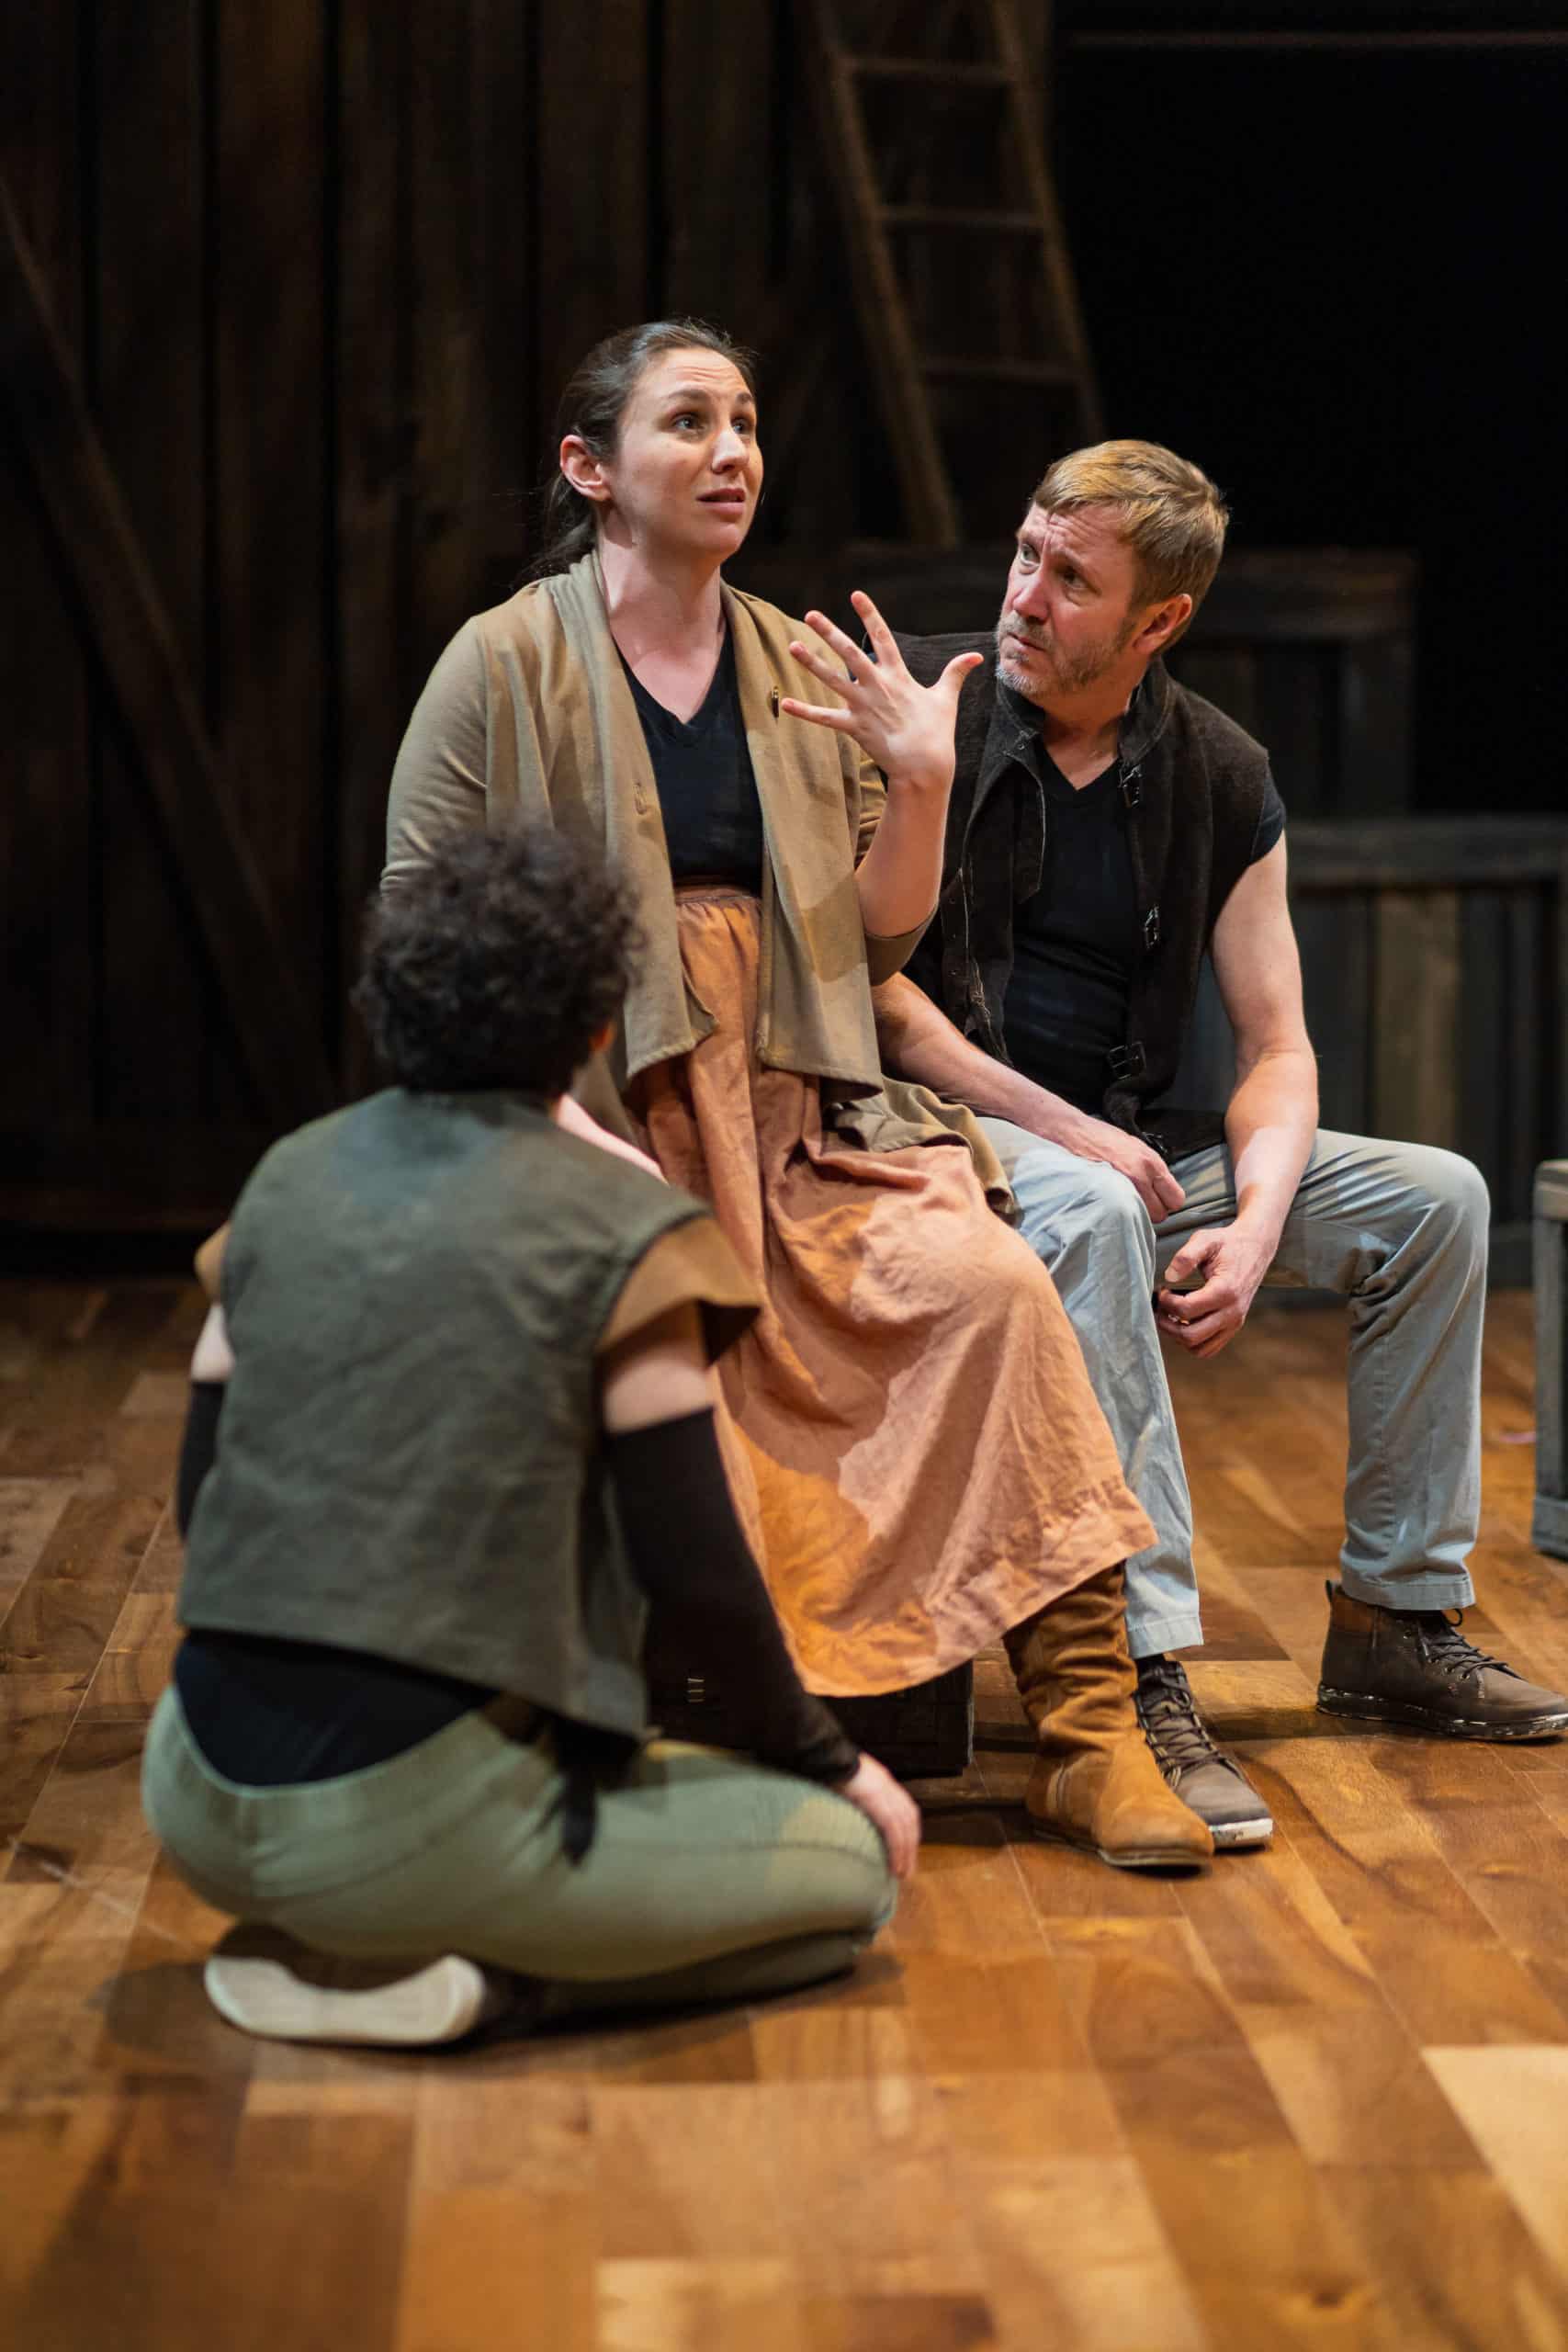 Oz Heiligman, Teresa Spencer, and Jonas Connors-Grey in HENRY V. Photo by Kiirstn Pagan.